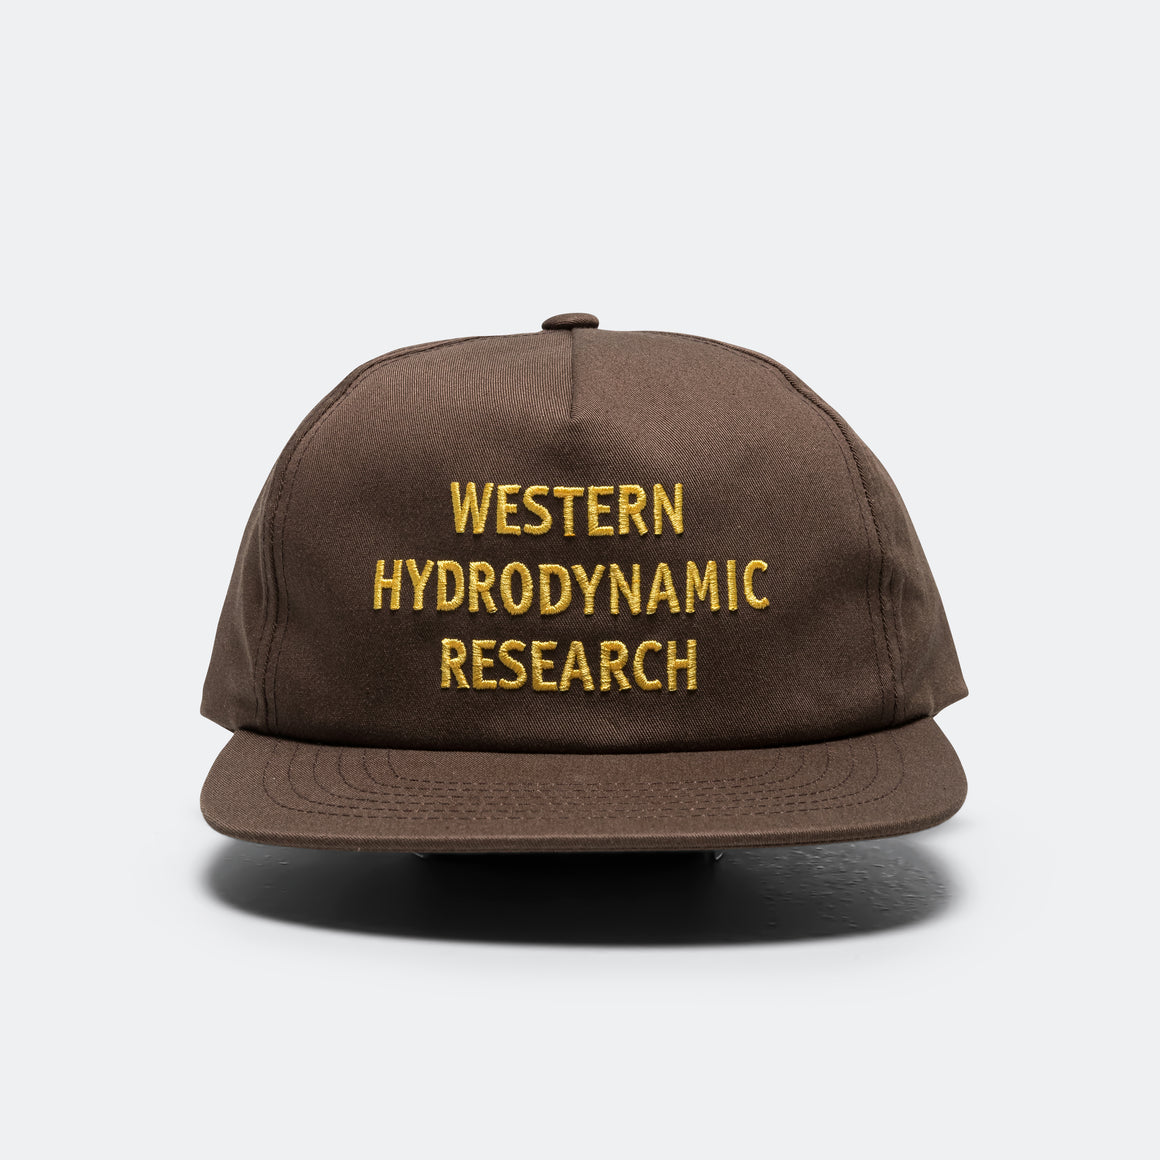 Western Hydrodynamic Research - Promotional Hat - Brown - UP THERE